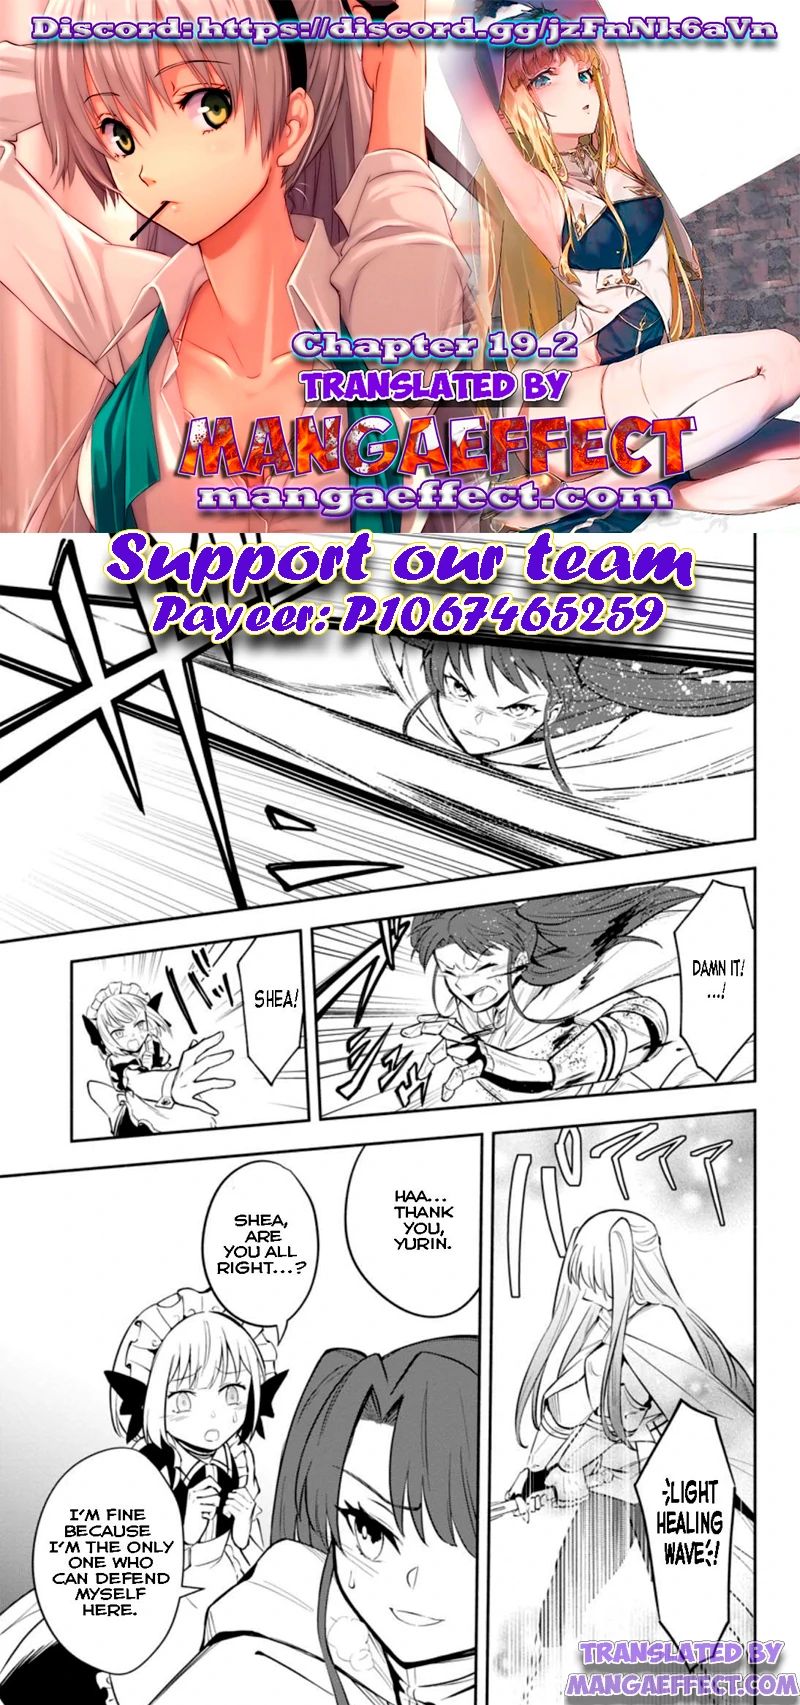 My Lover Was Stolen, And I Was Kicked Out Of The Hero’S Party, But I Awakened To The Ex Skill “Fixed Damage” And Became Invincible. Now, Let’S Begin Some Revenge - Page 1